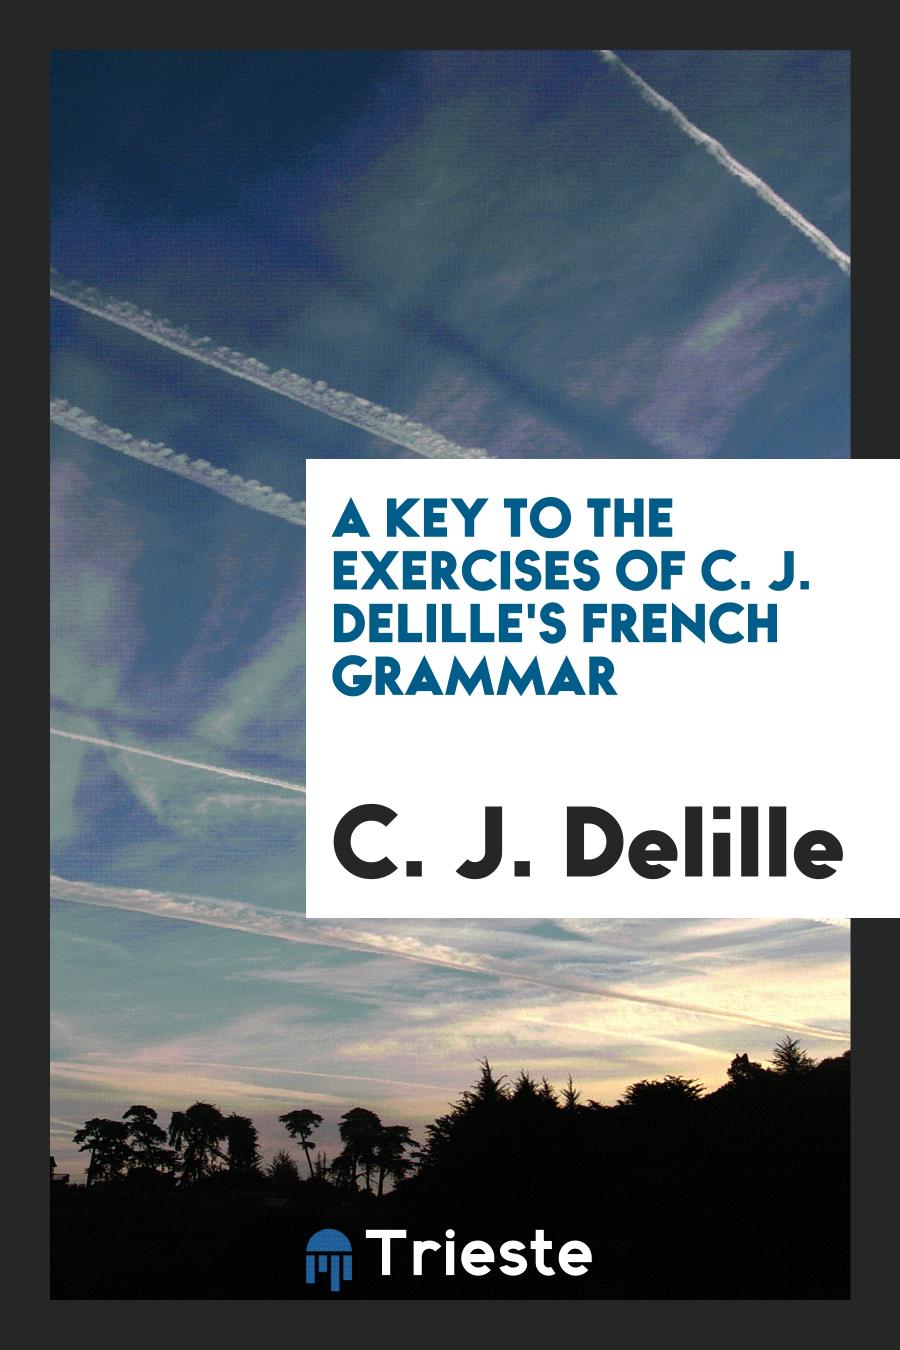 A key to the exercises of C. J. Delille's French grammar